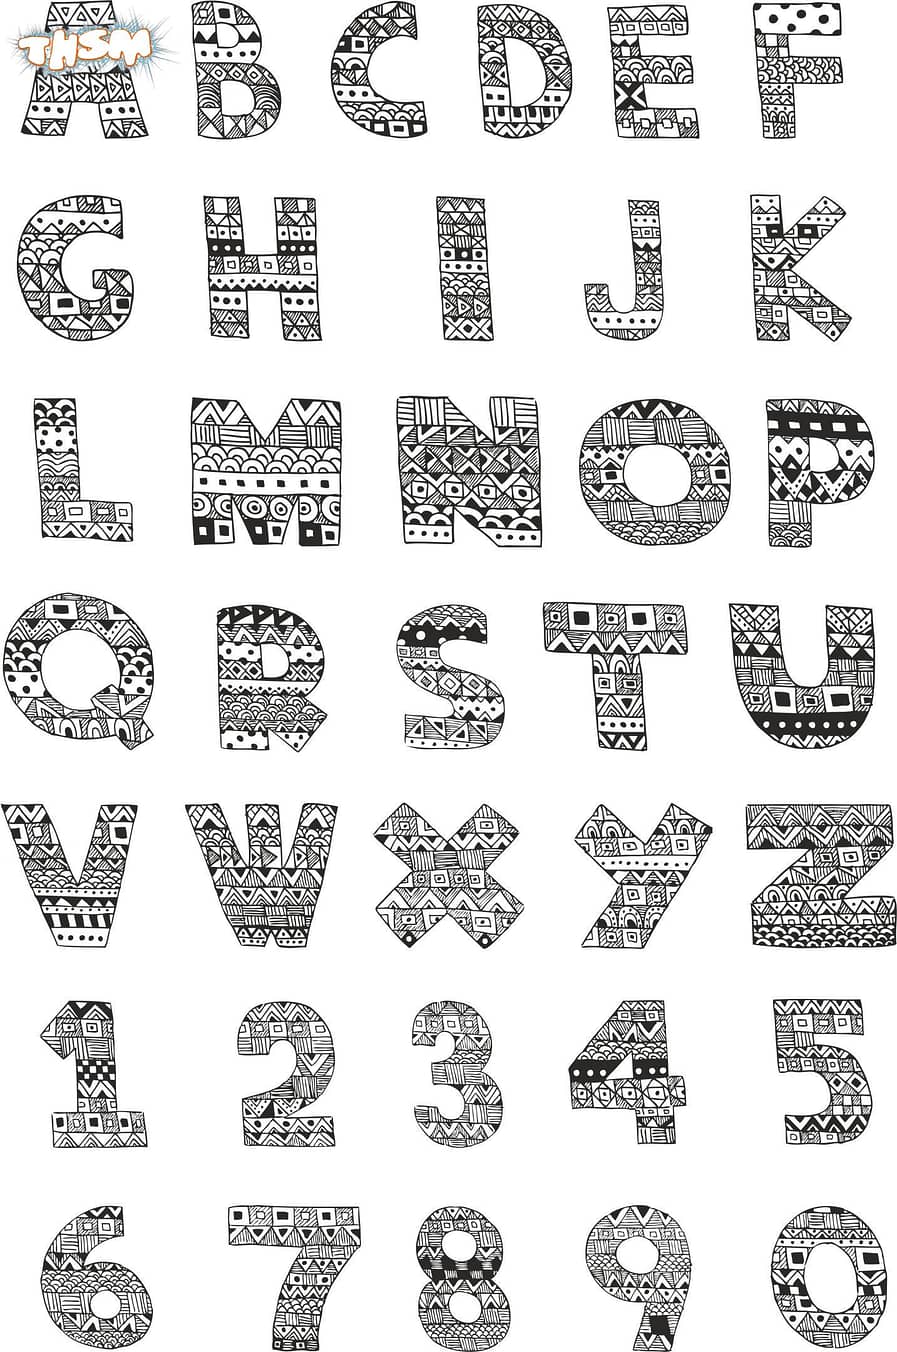 Handdrawn Ornamented Alphabet Pack Free Vector cdr Download - 3axis.co